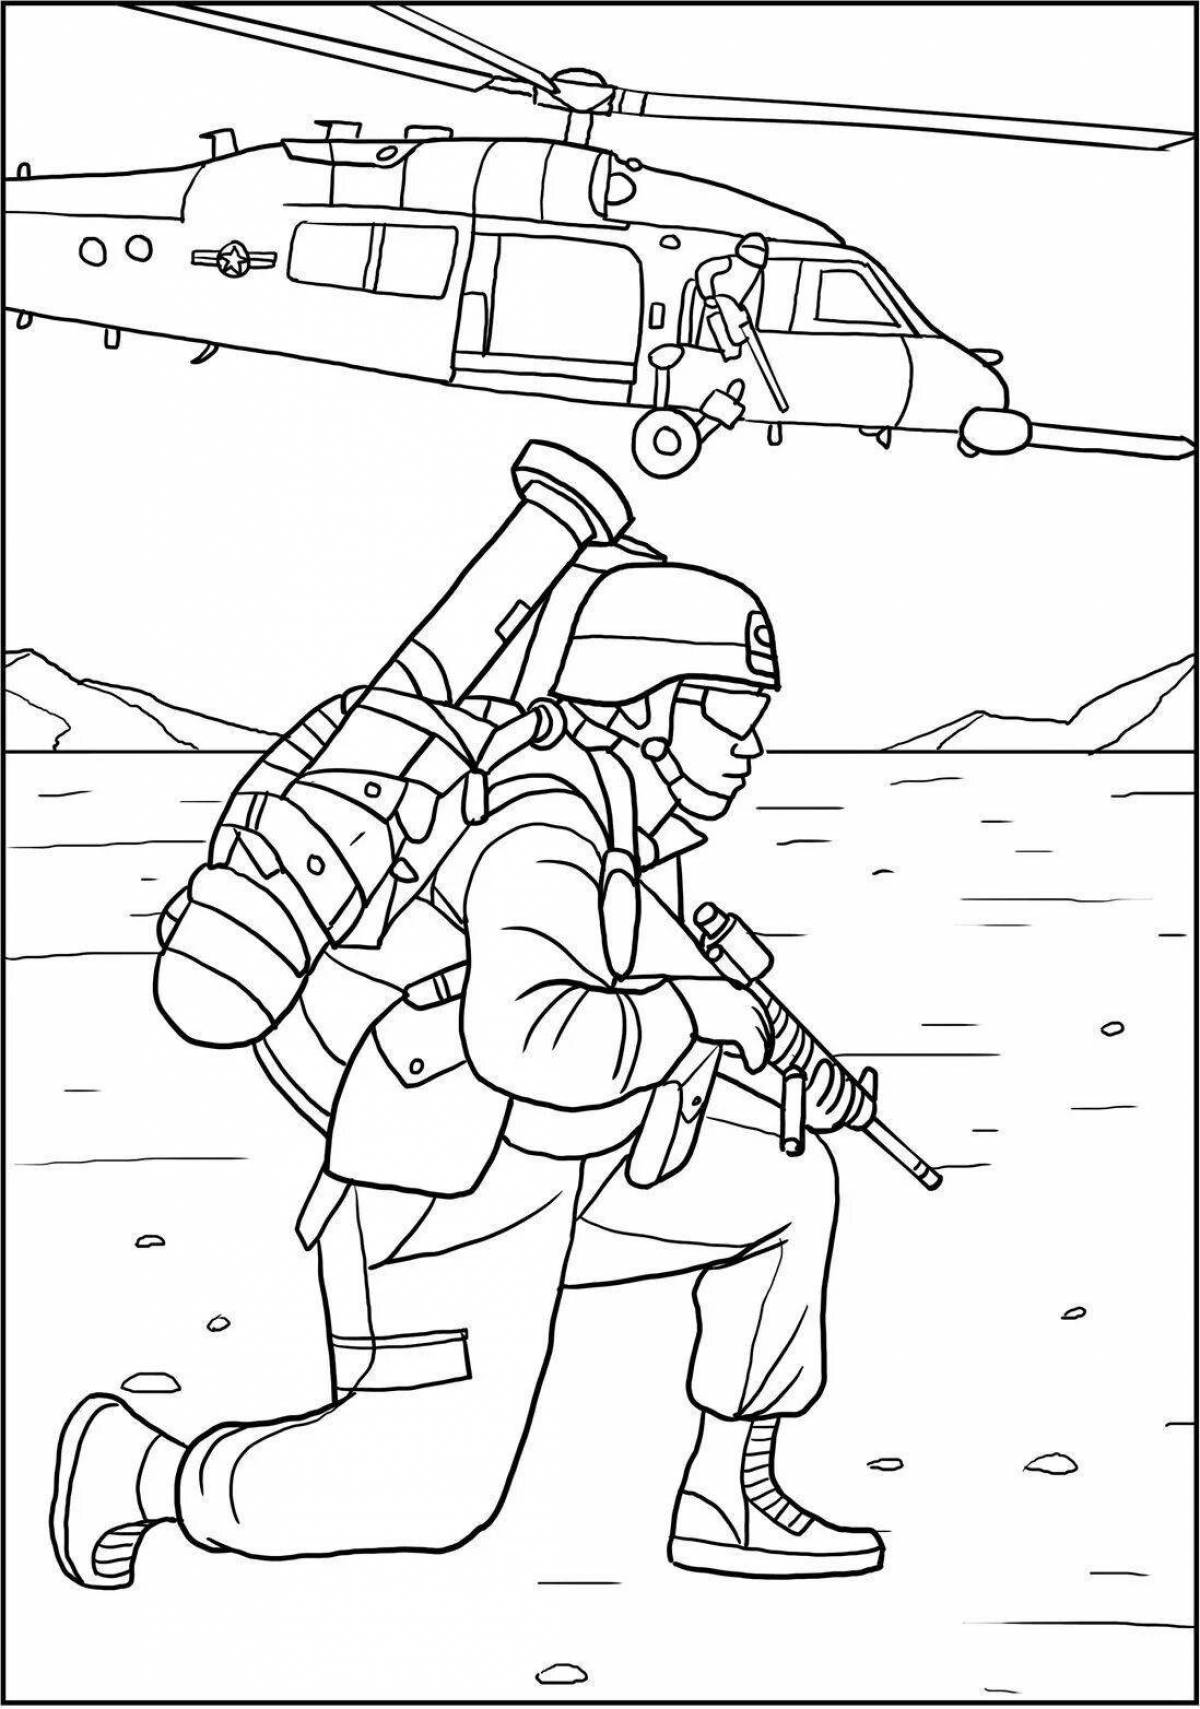 Amazing military profession coloring book for babies